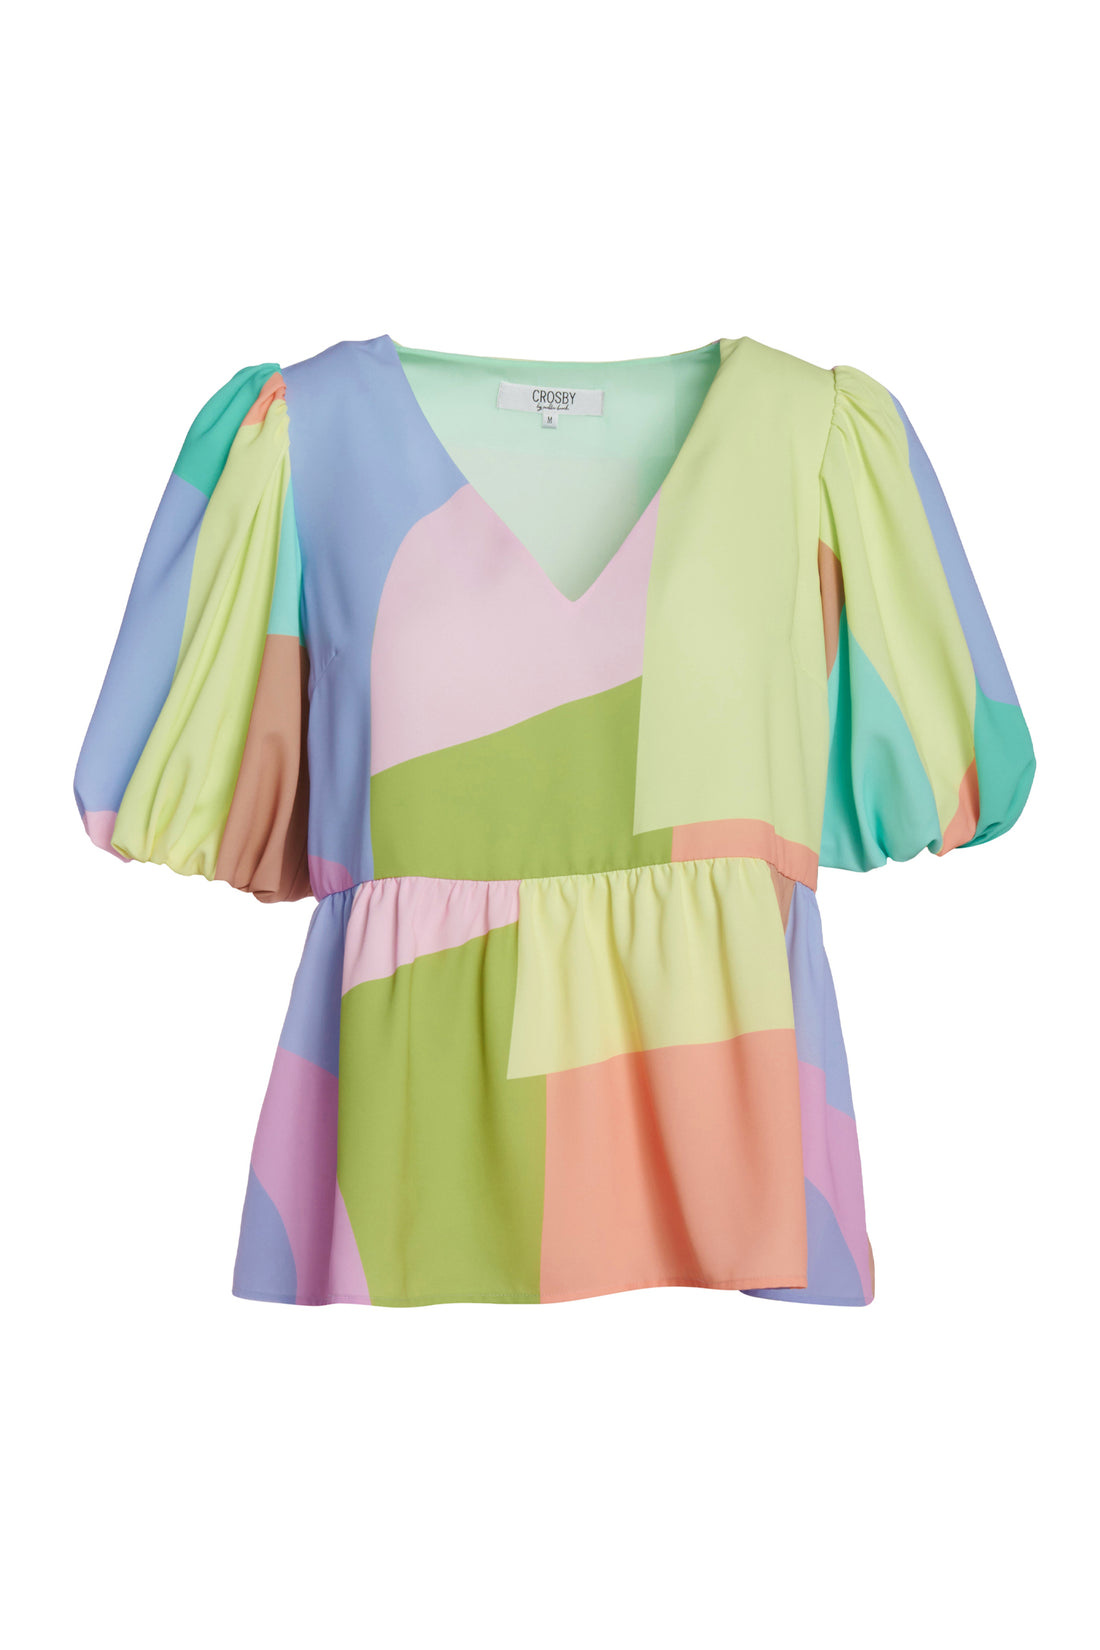 Crosby By Mollie Burch Jackie Top Sunset Colorblock